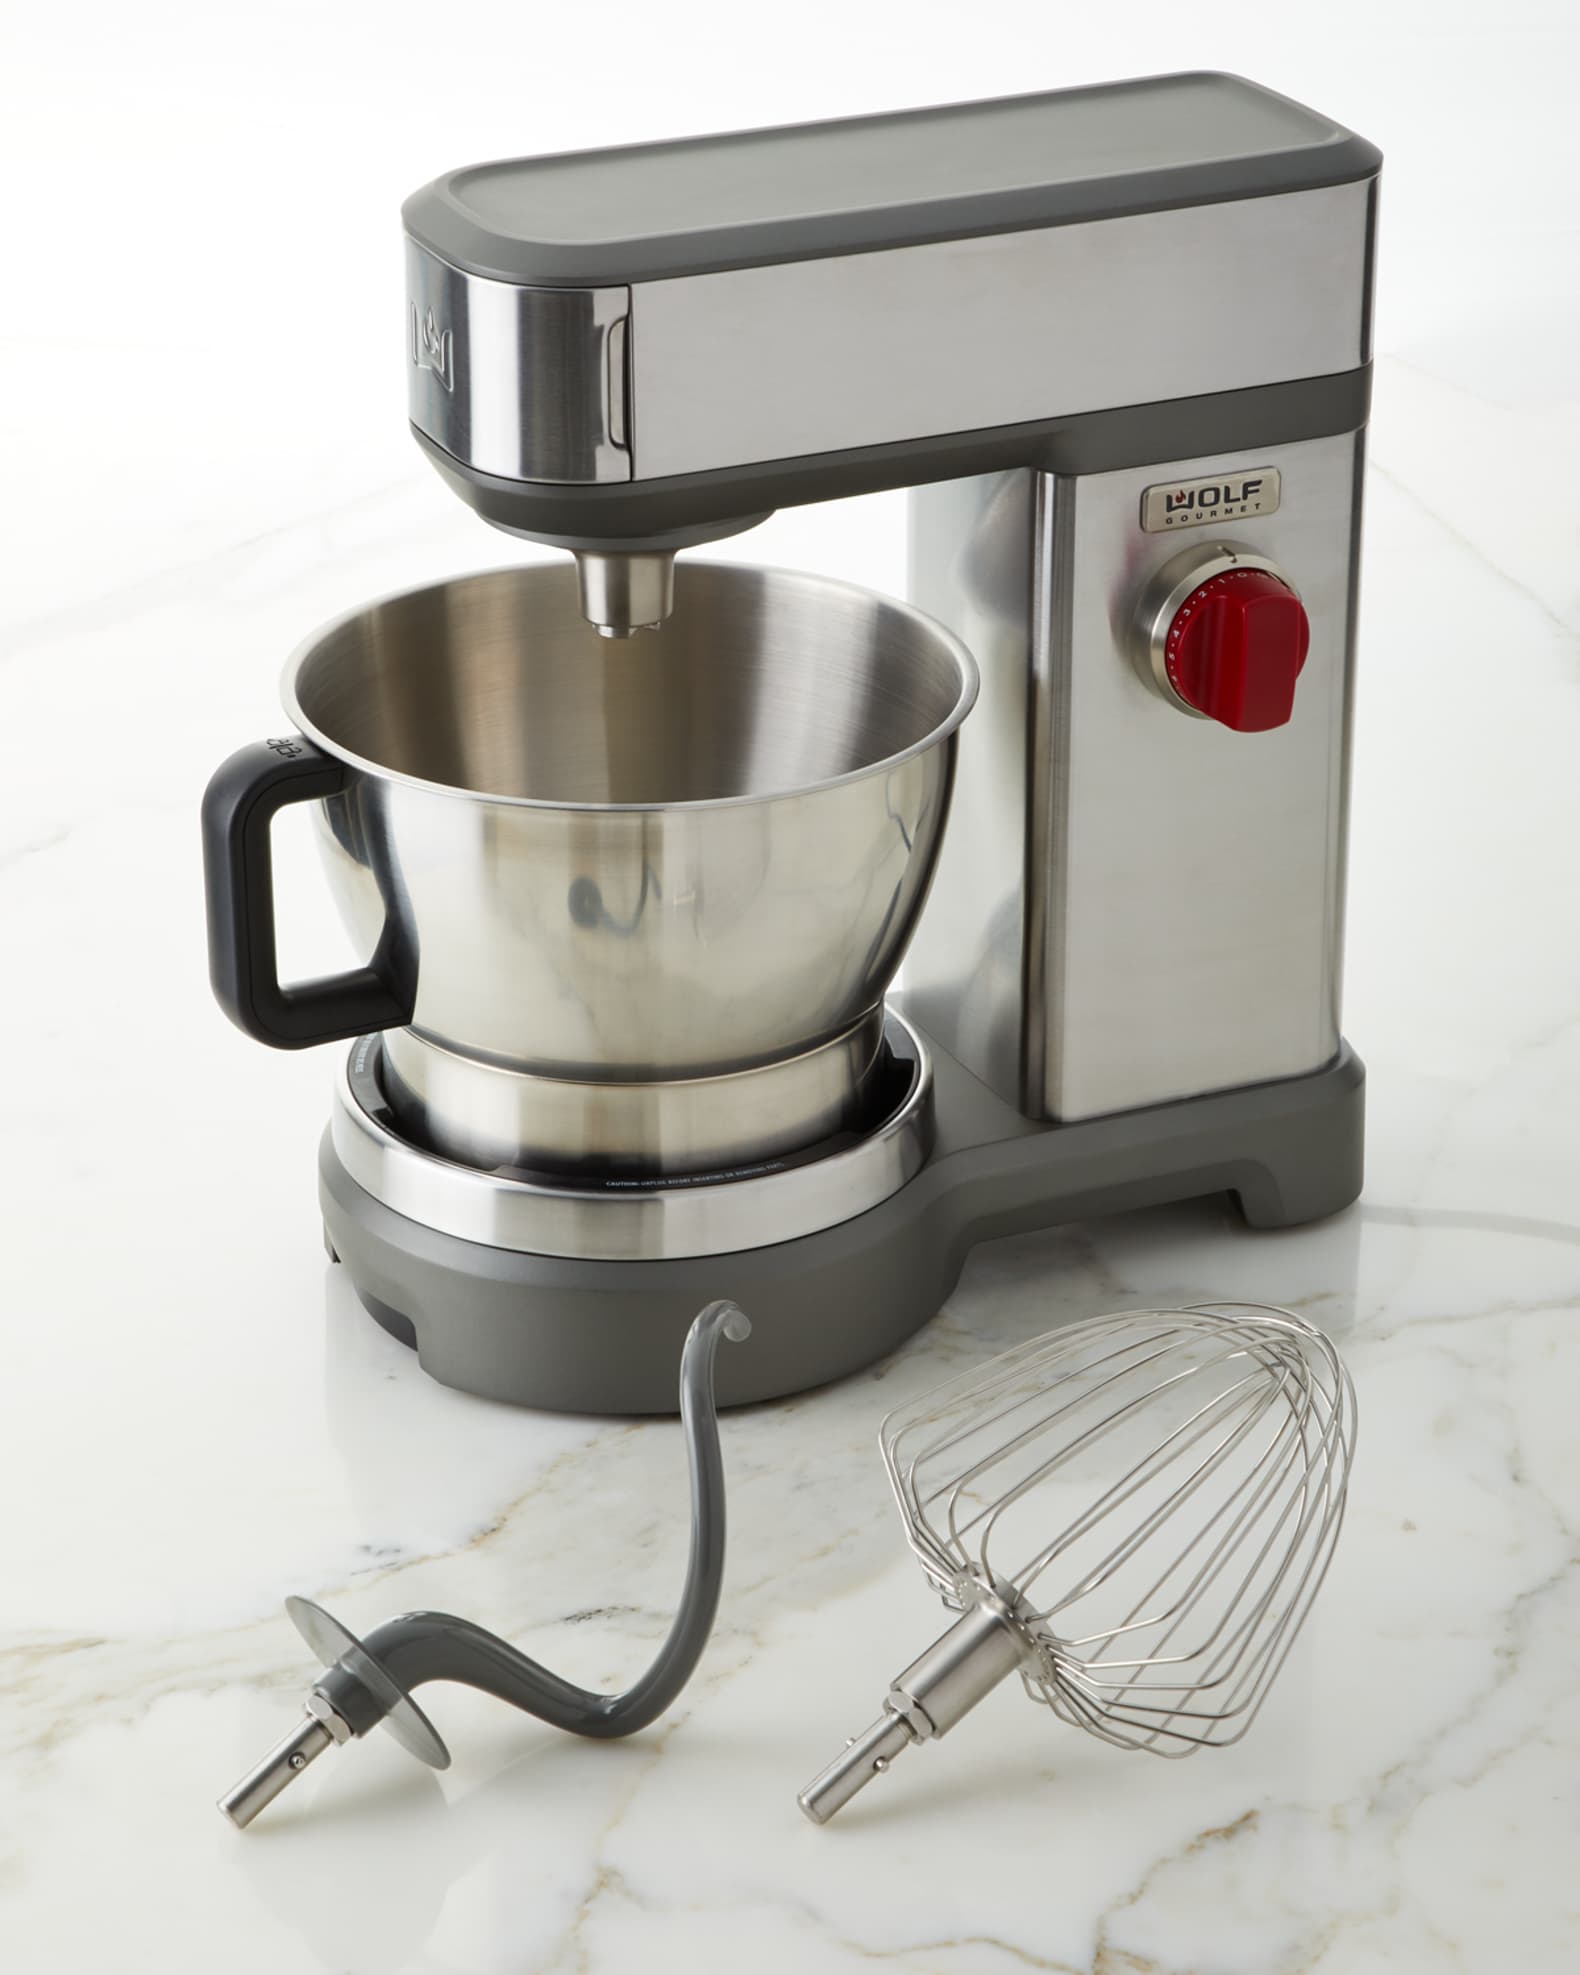 reputation Abbreviation have confidence Wolf Gourmet 7-Qt. High Performance Stand Mixer | Neiman Marcus